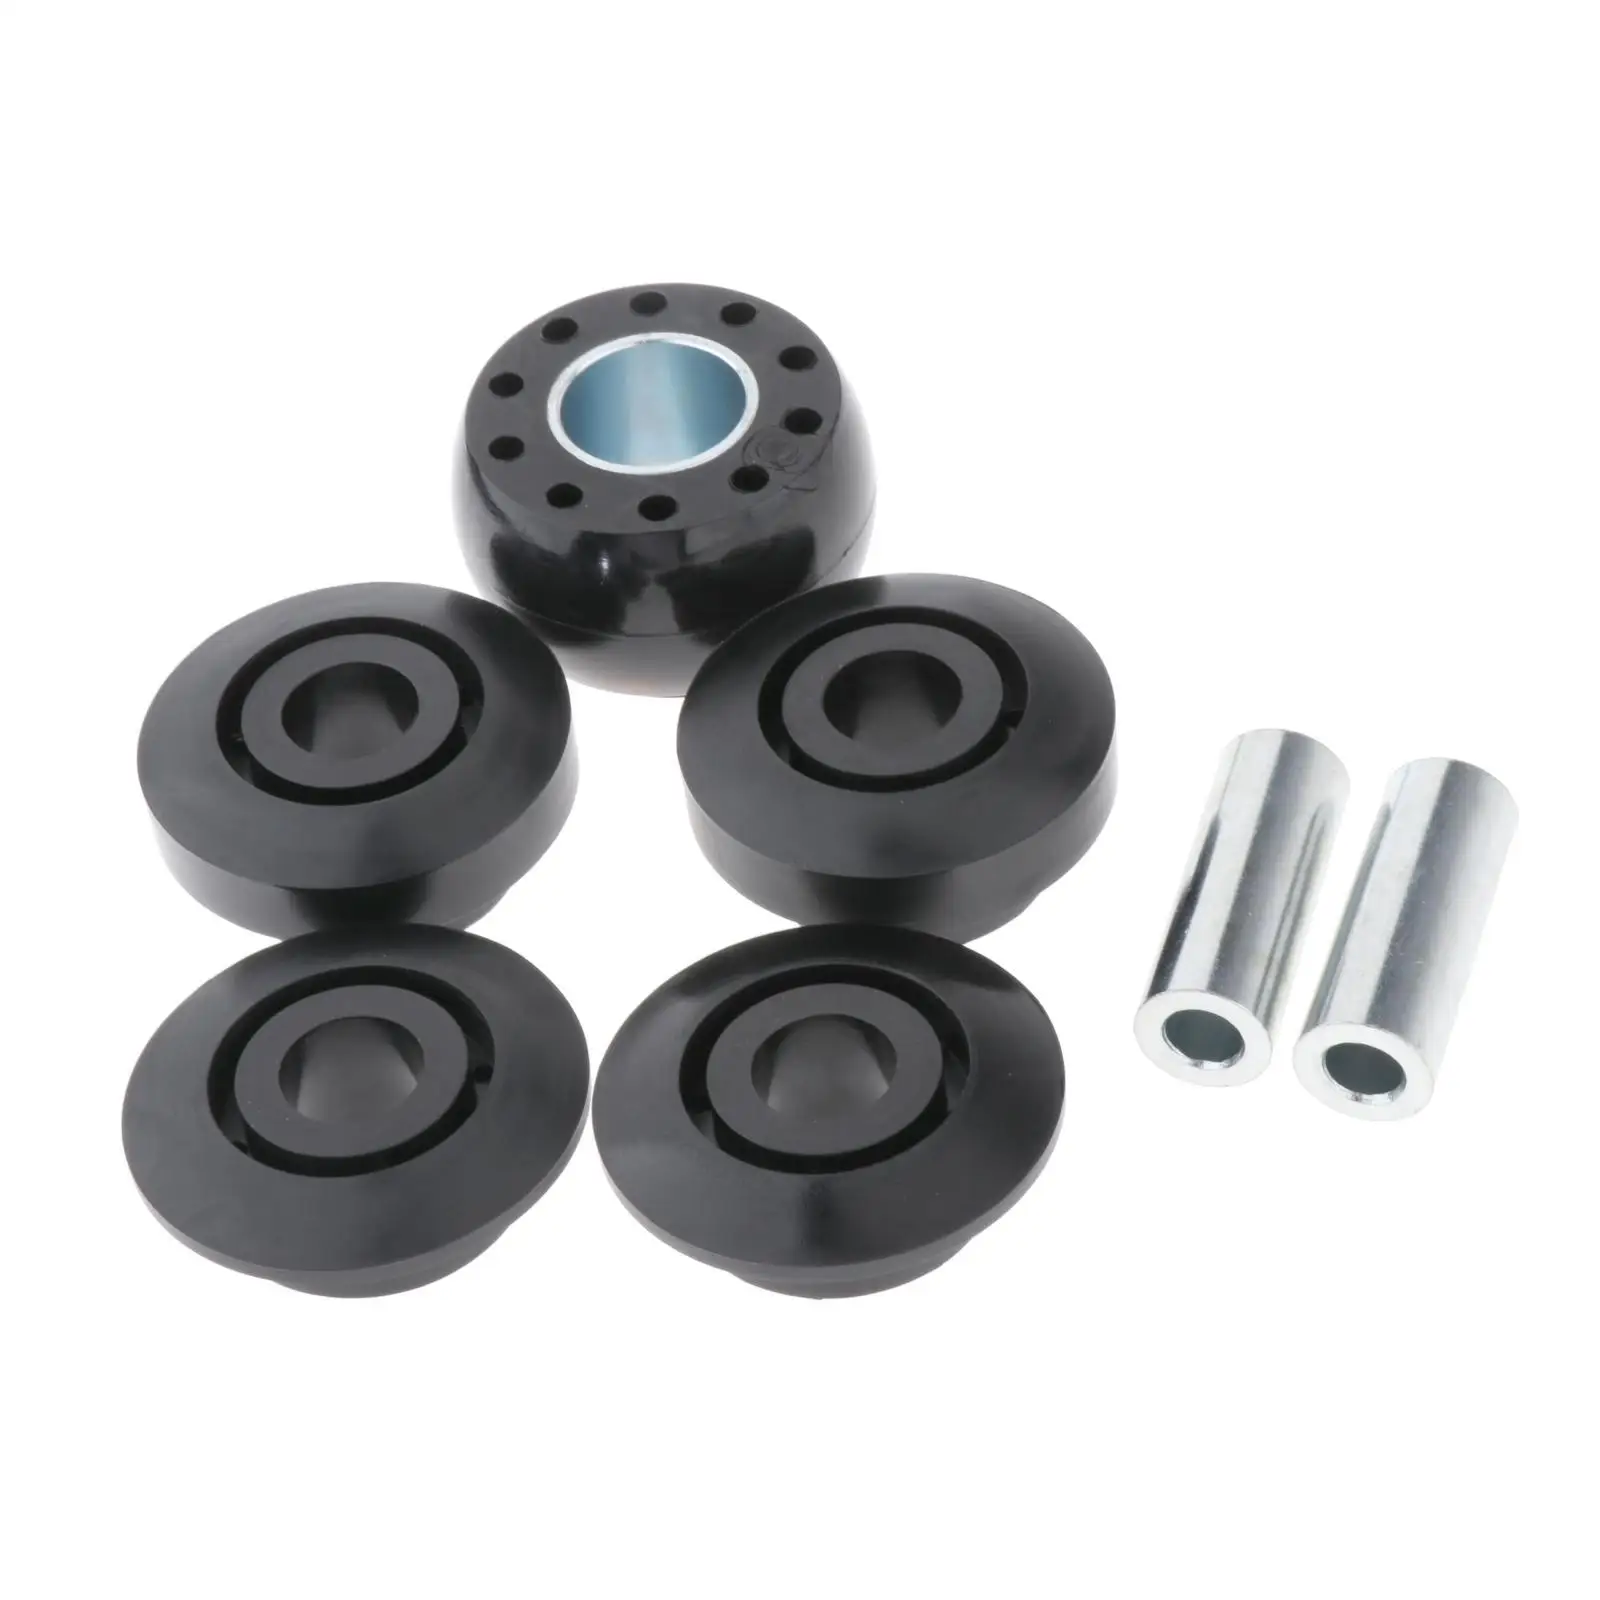 Rear Differential Mount Bushings KDT911 Fits for Nissan 350Z 370Z M35 Parts